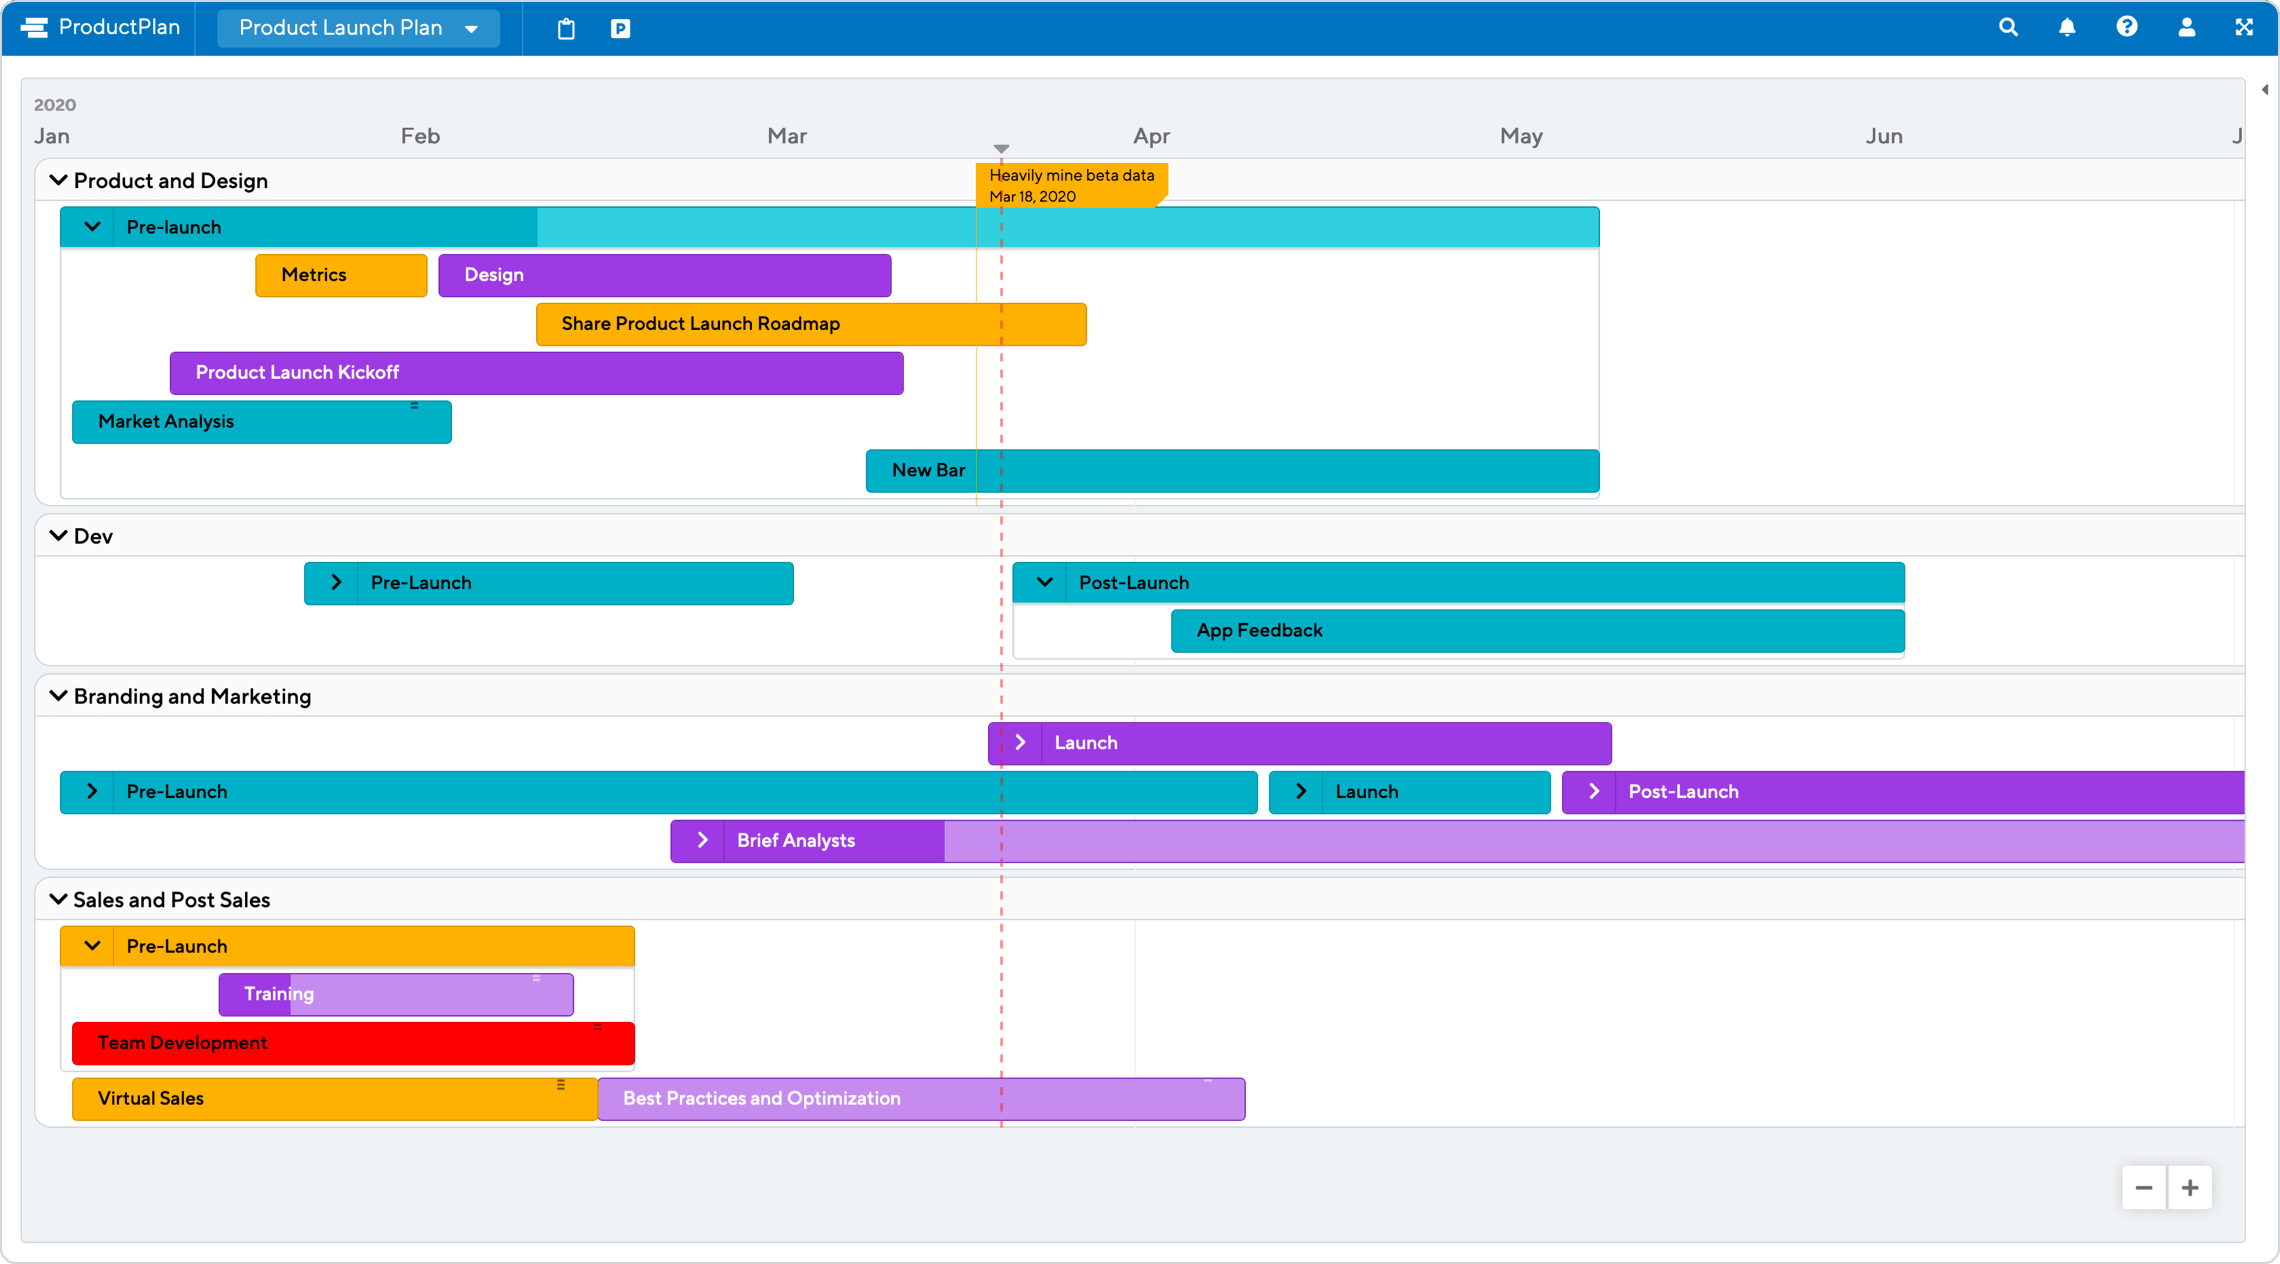 Product Development Timeline Template Excel from www.productplan.com